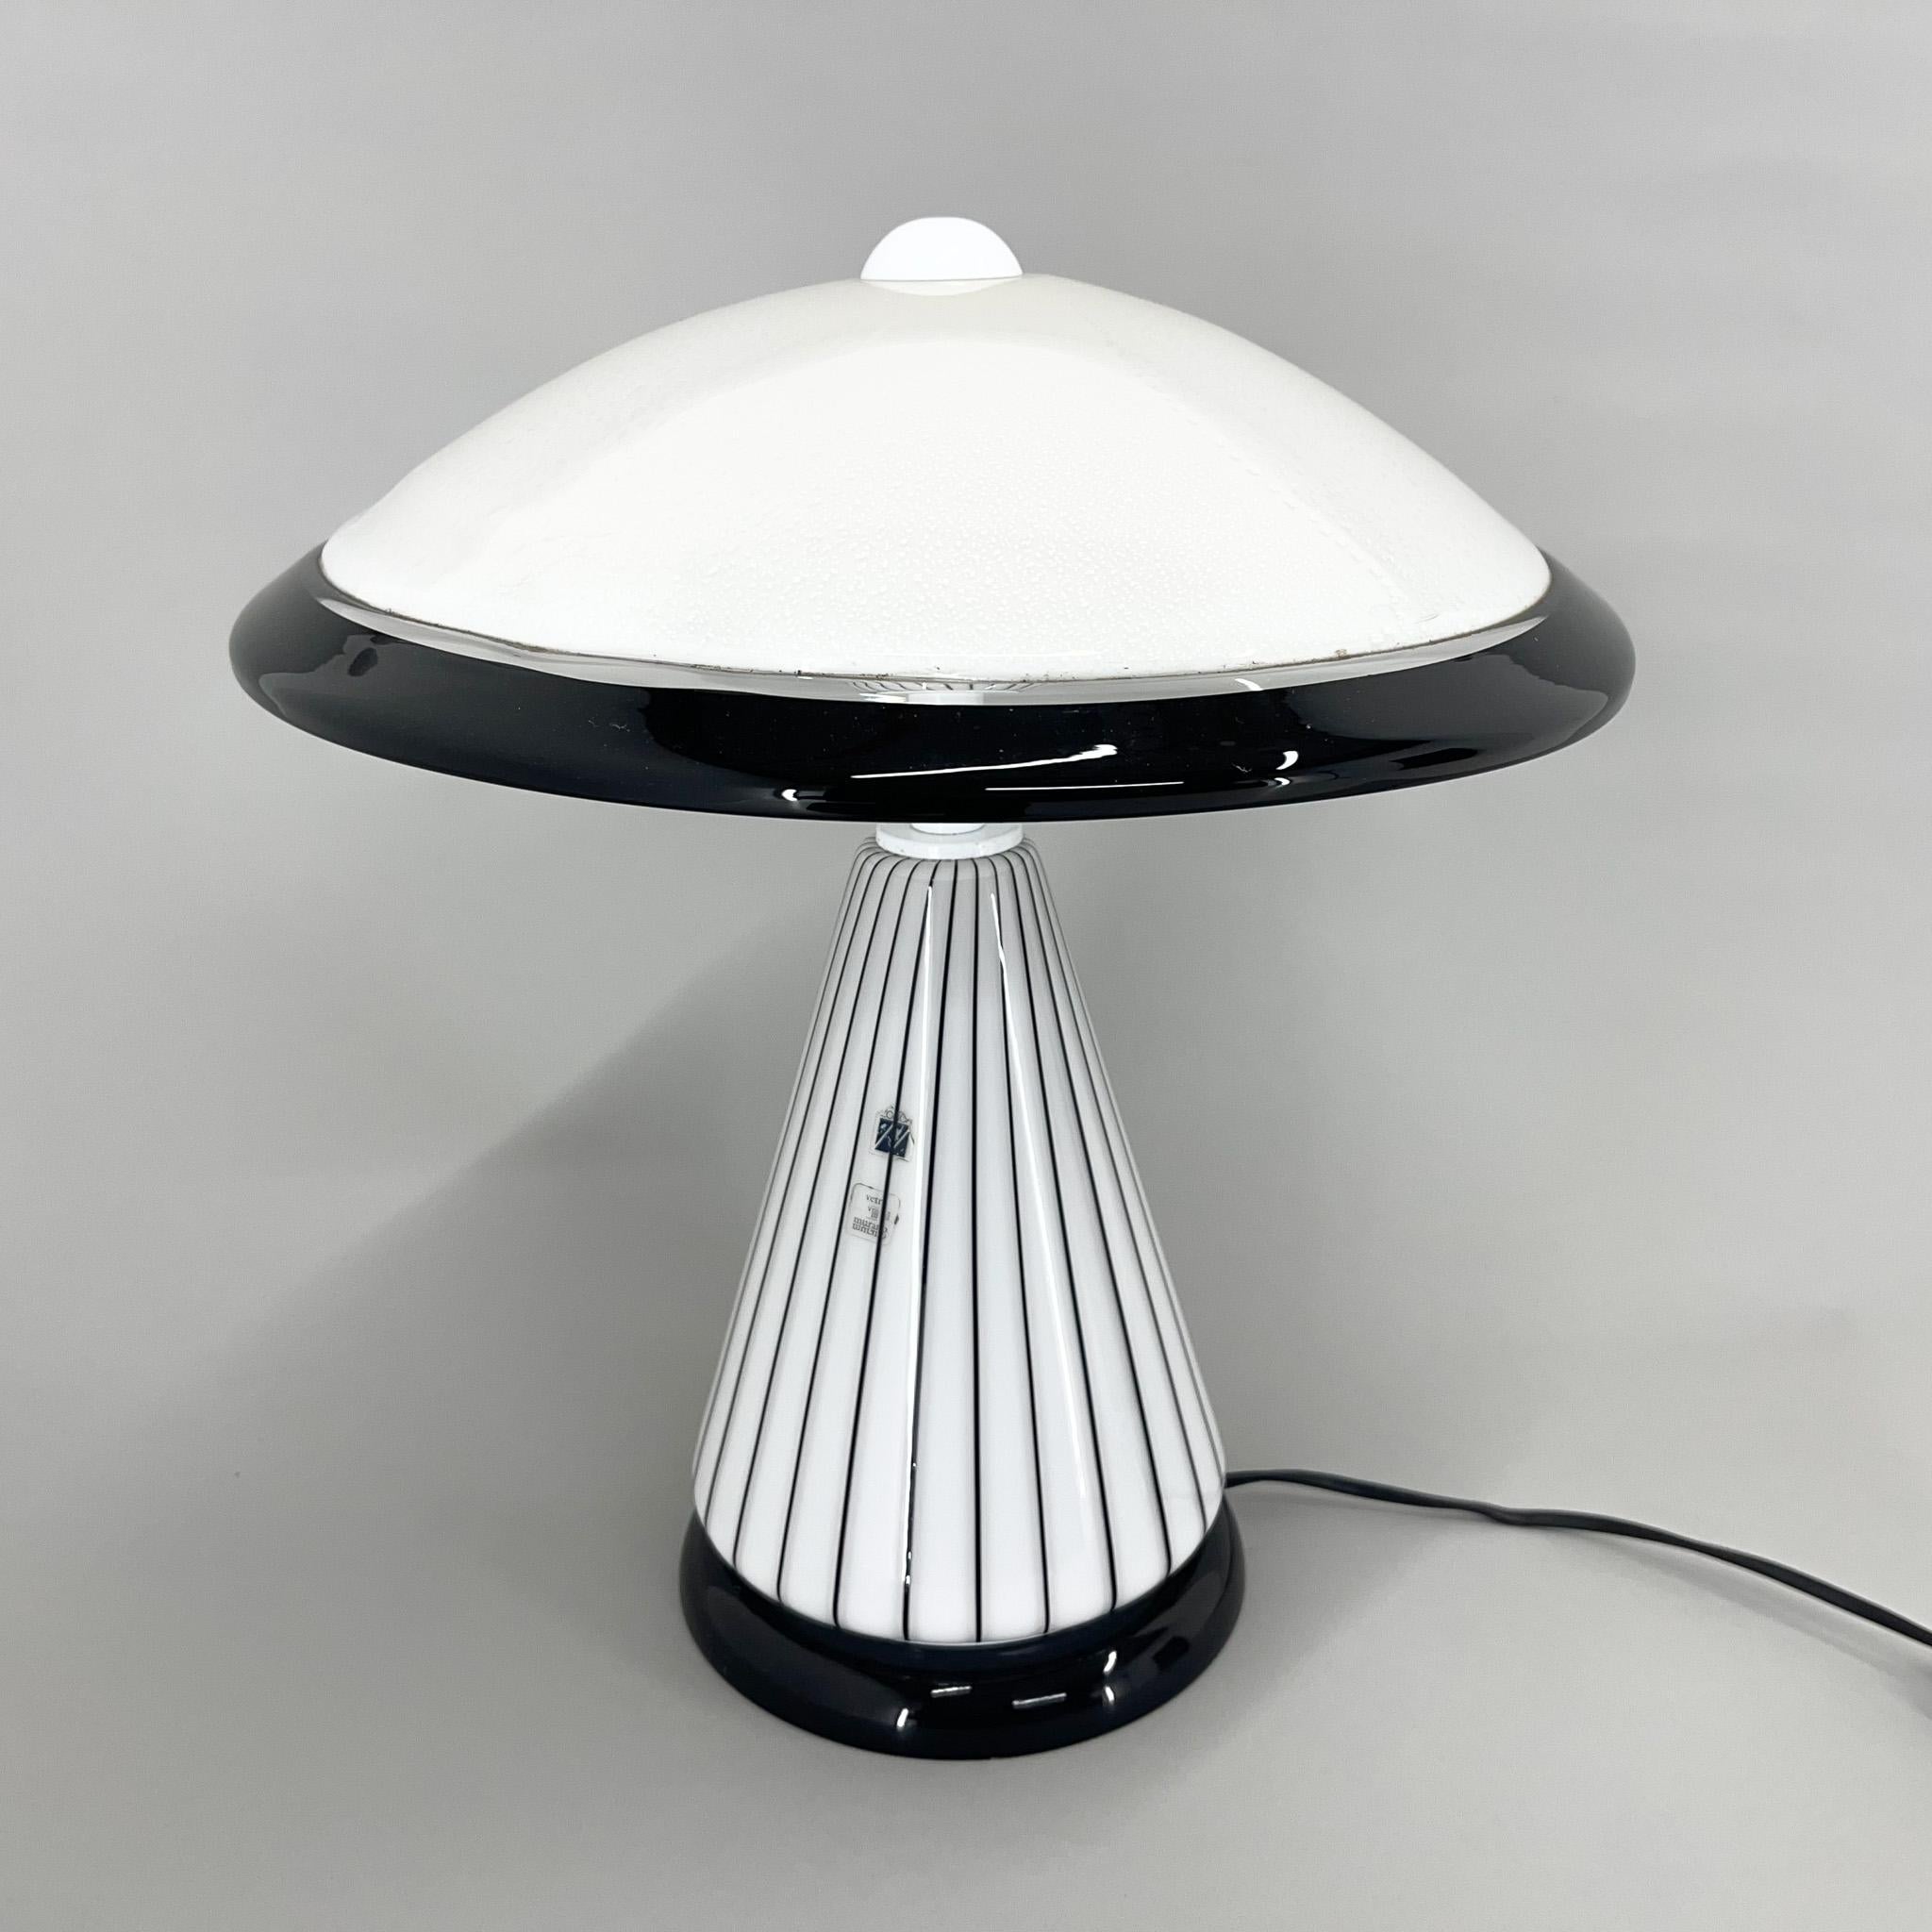 Rare all glass Vetri Murano black and white table lamp by Zonca (see label). Very good vintage condition, made in Italy in the 1980's.